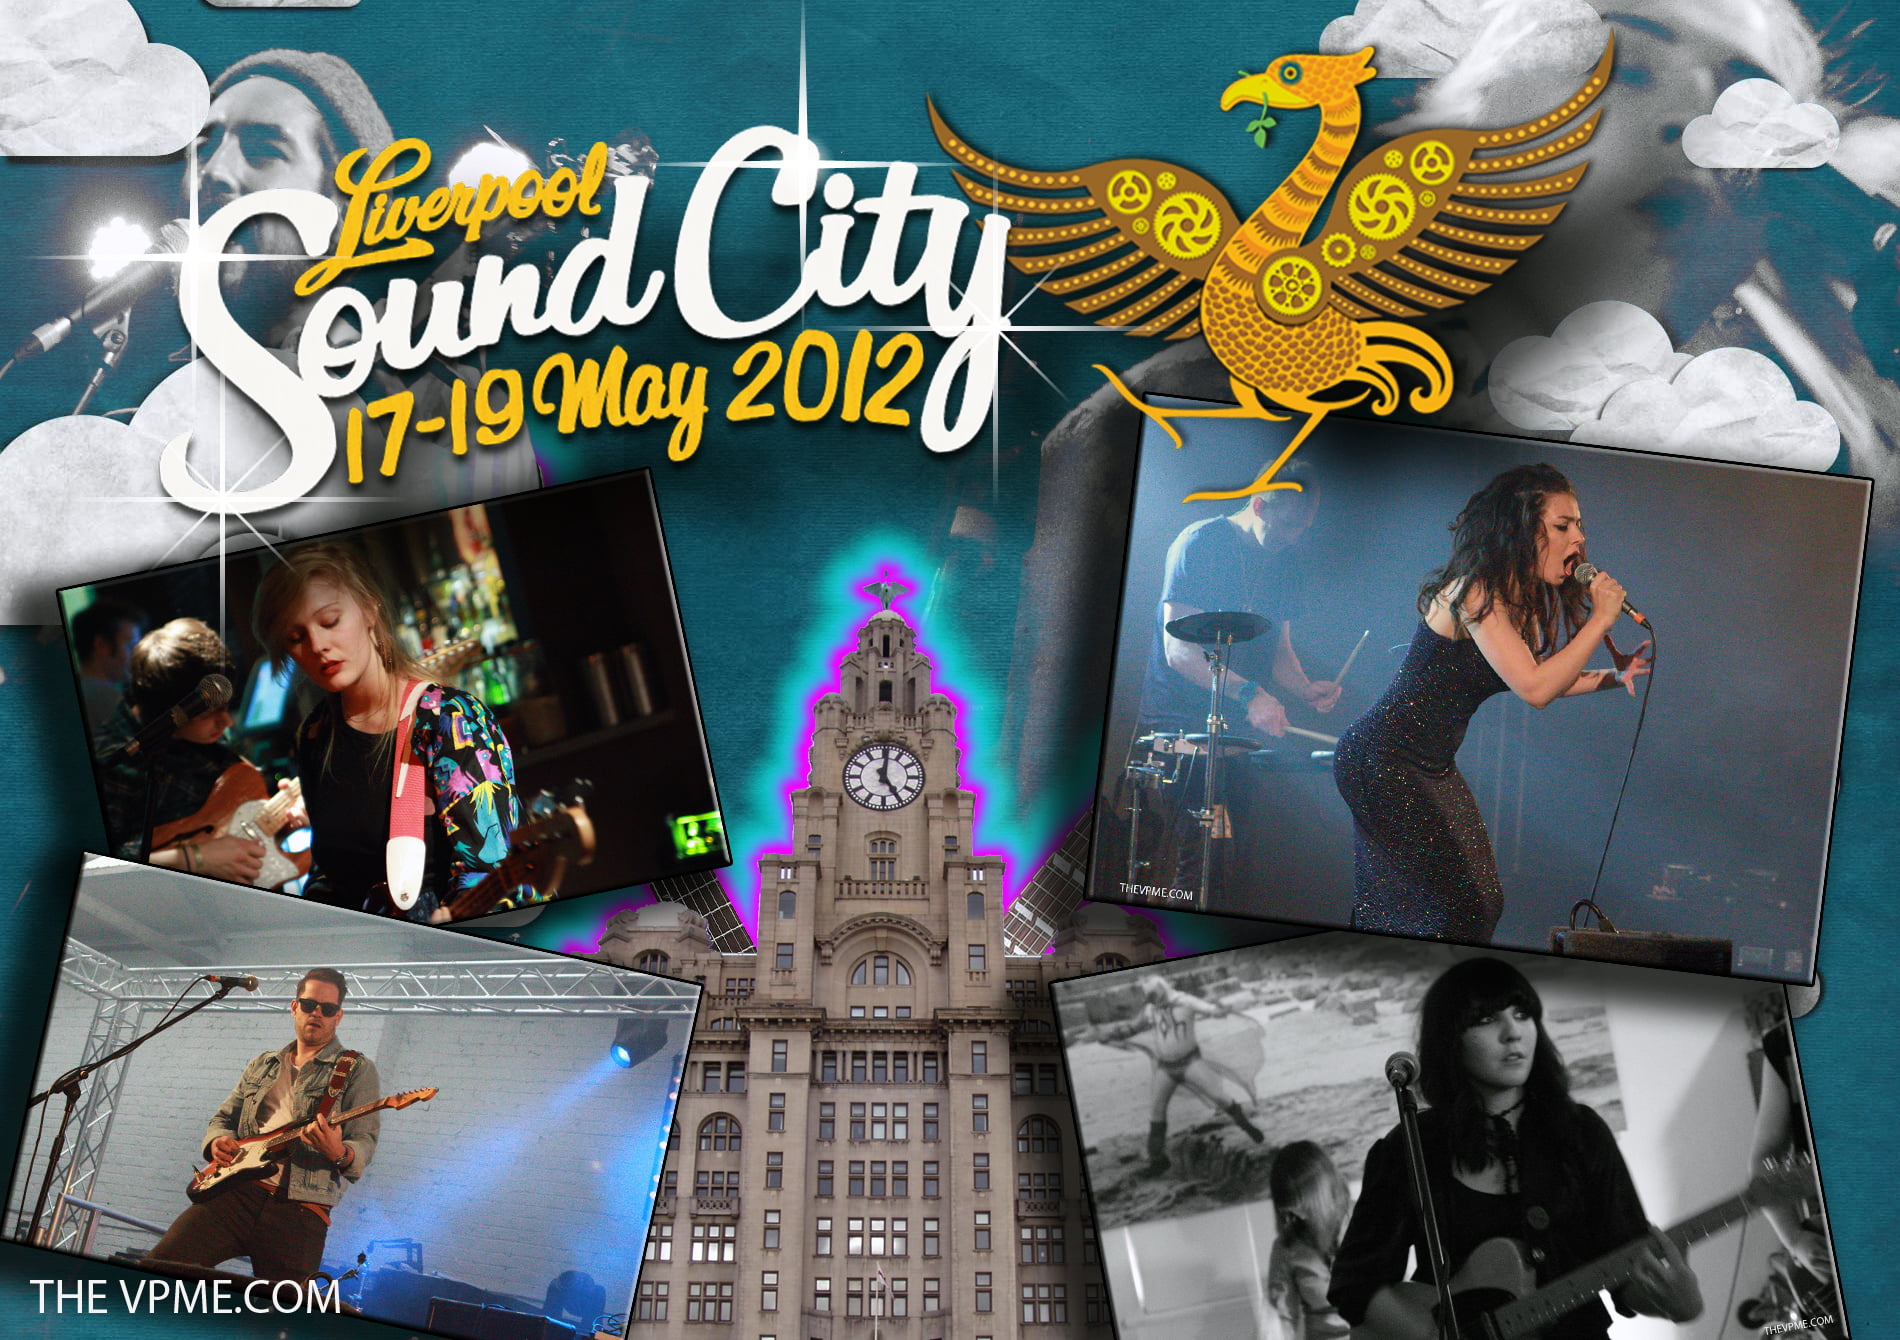 The VPME | Liverpool Sound City 2012 - Day By Day Highlights. 1